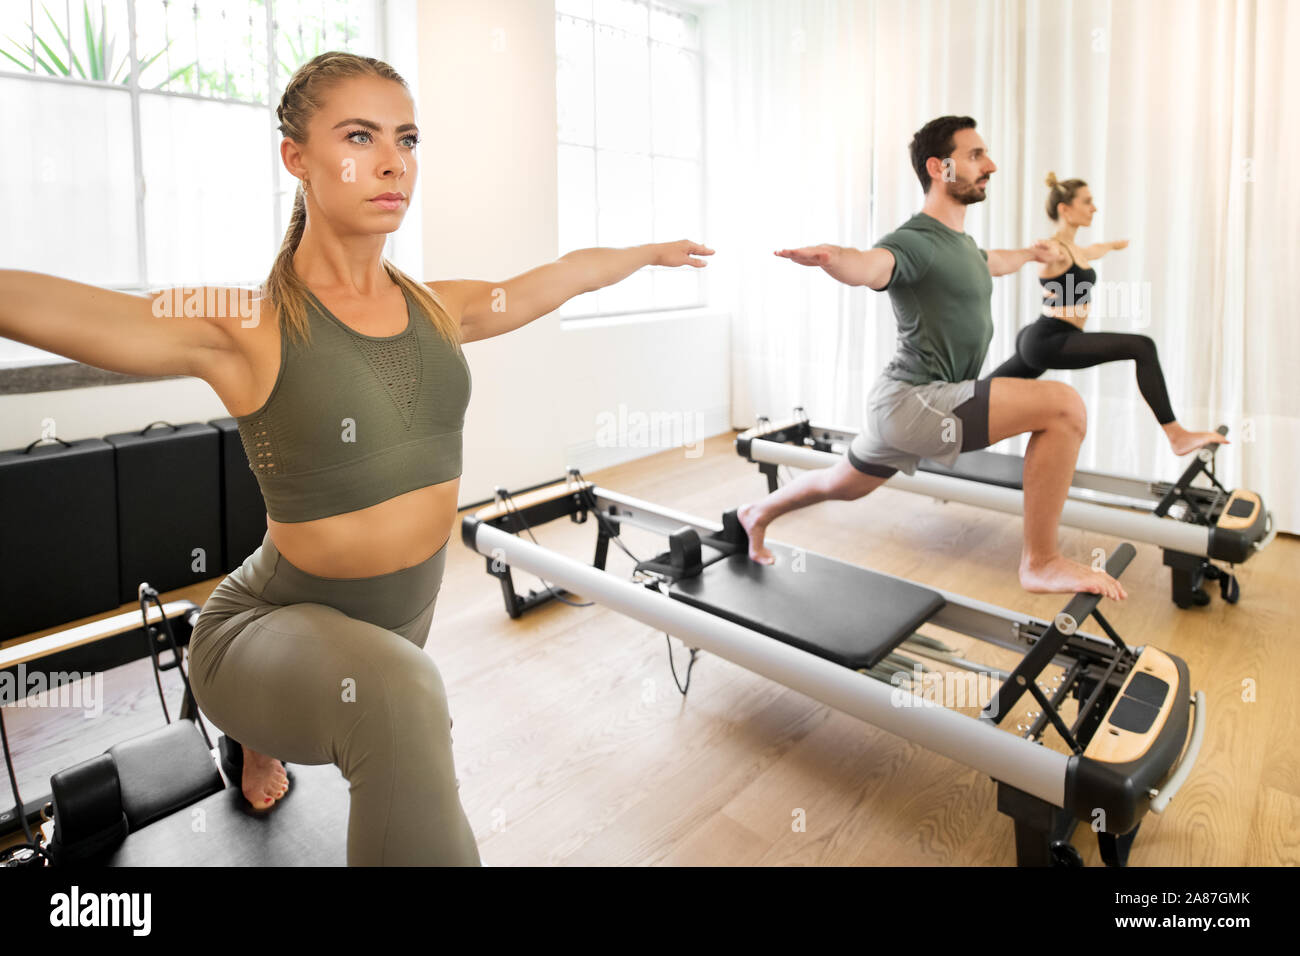 People working out doing yoga high lunge exercises on pilates reformer beds in a gym in a health and fitness concept Stock Photo